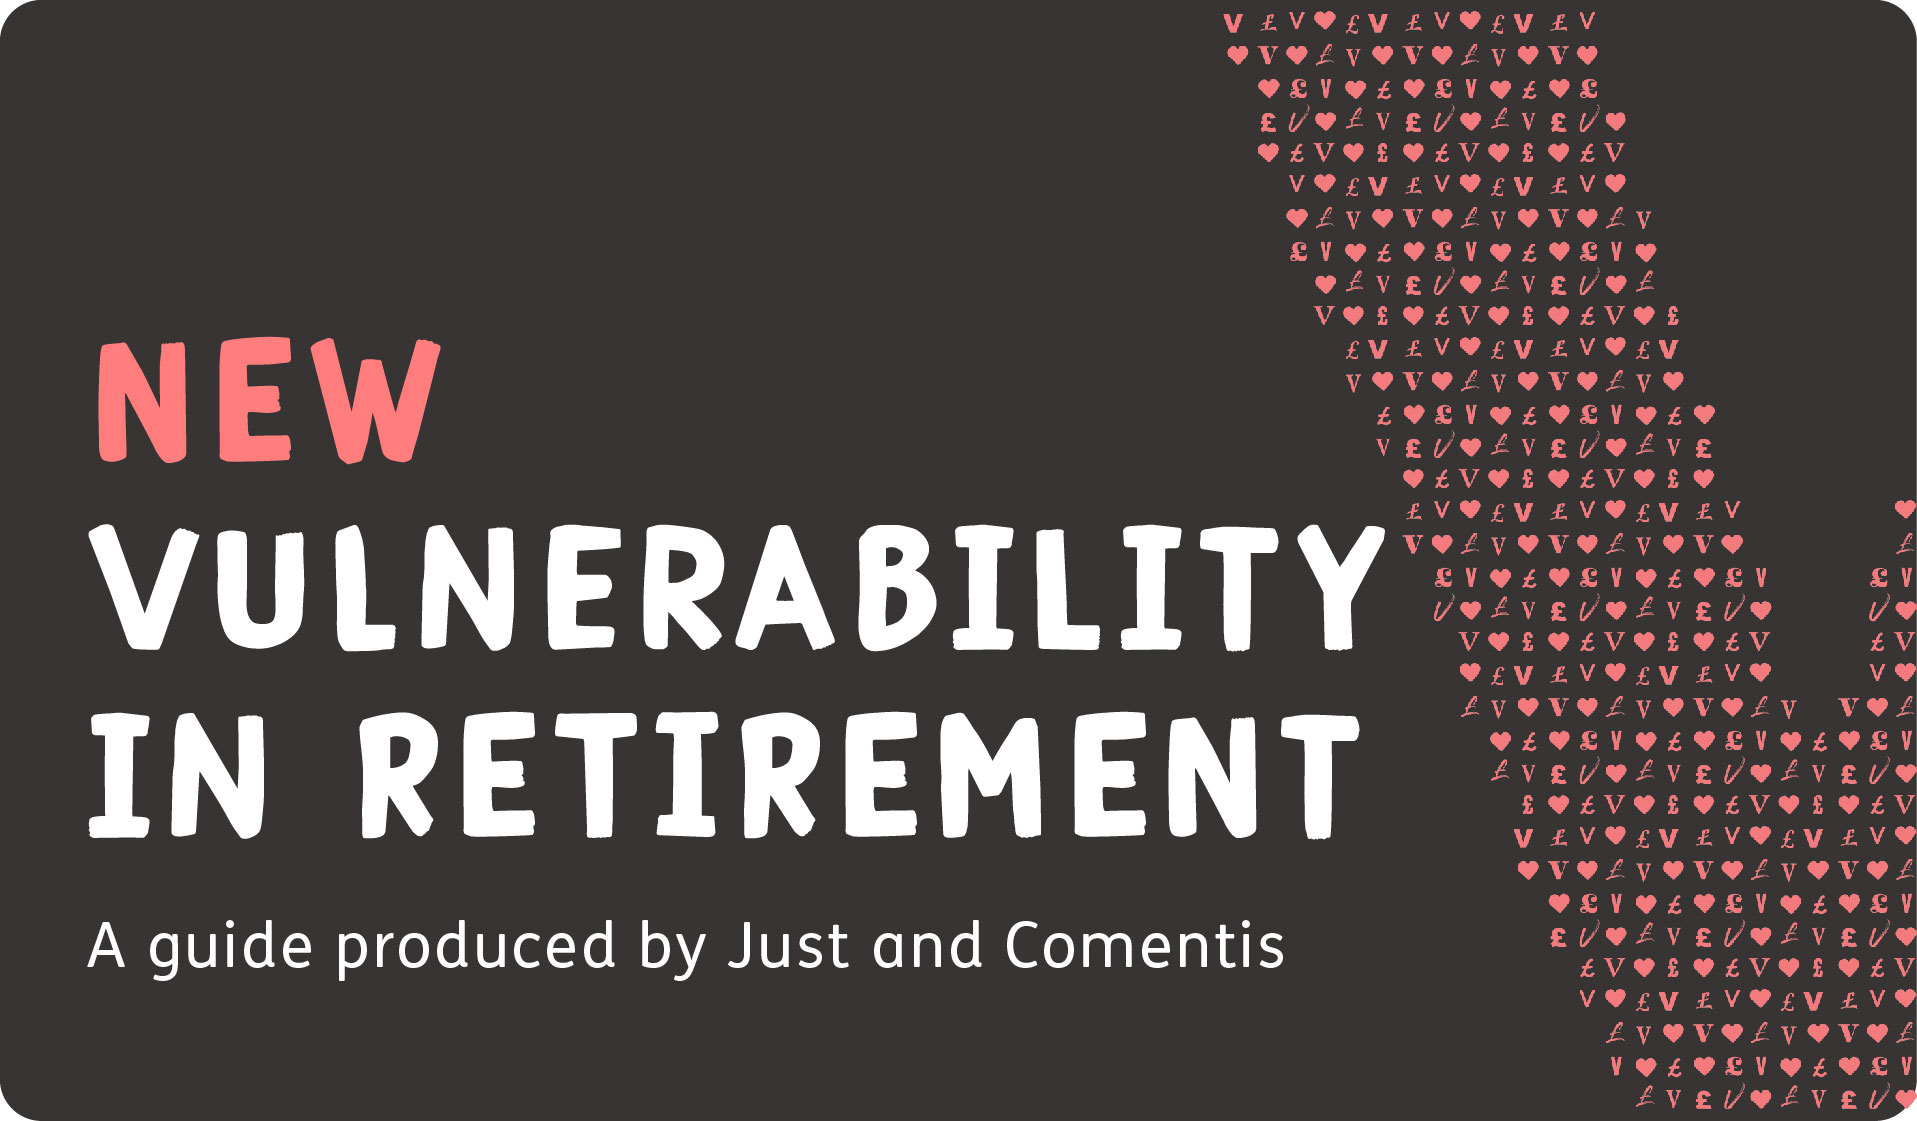 A guide to vulnerability in retirement